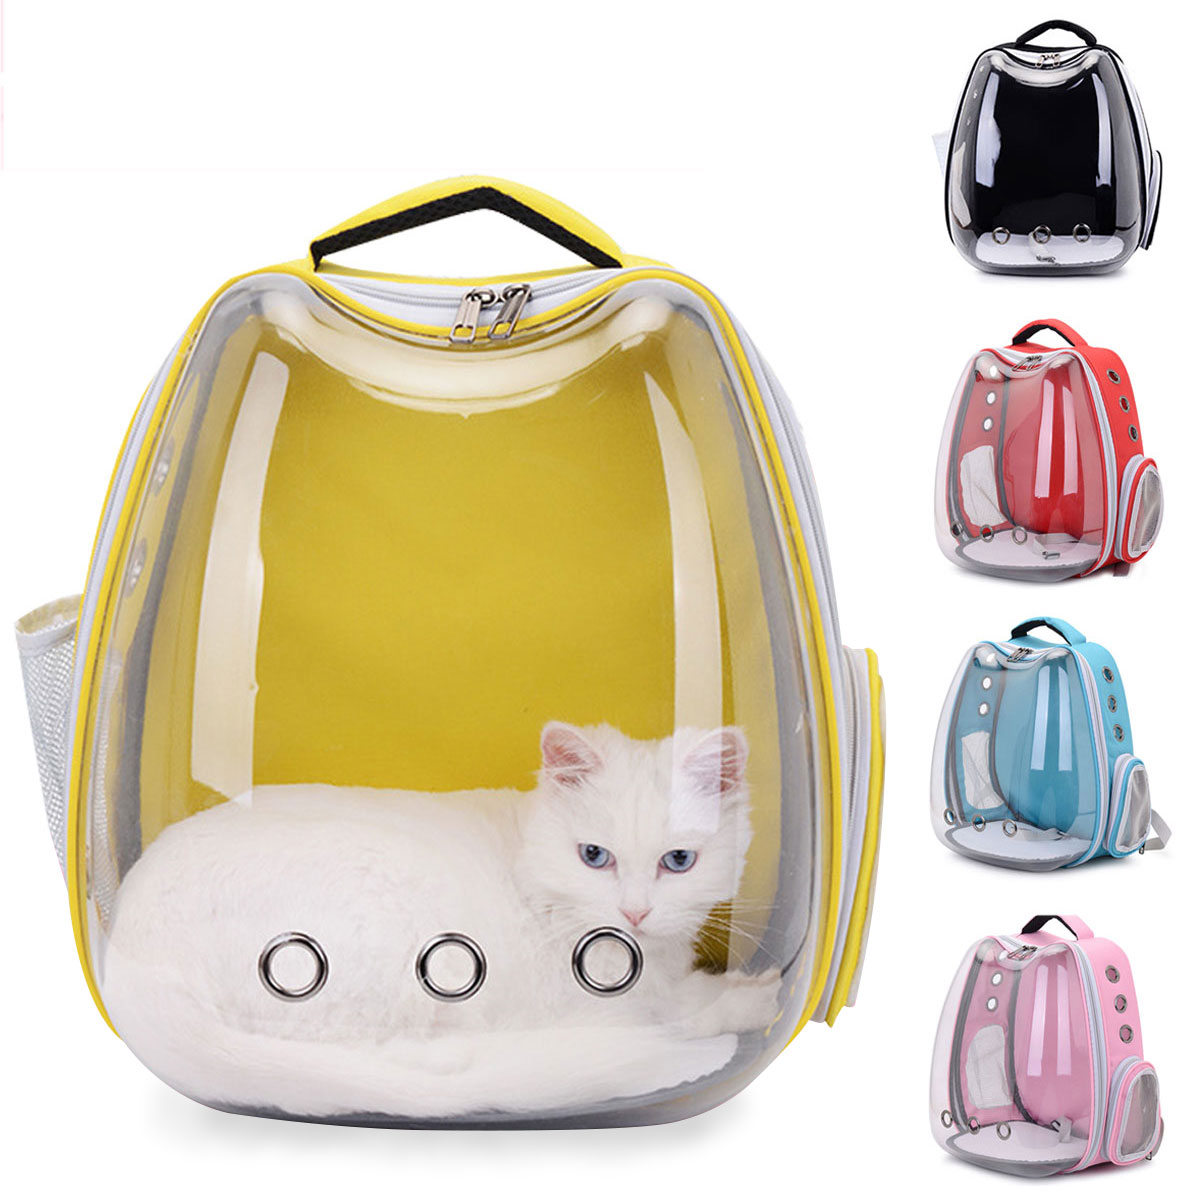 Multi-function-Pet-Carrier-Backpack-Waterproof-Oxford-Cloth-for-Cat-Dog-Puppy-Supplies-Travel-Portab-1939112-1